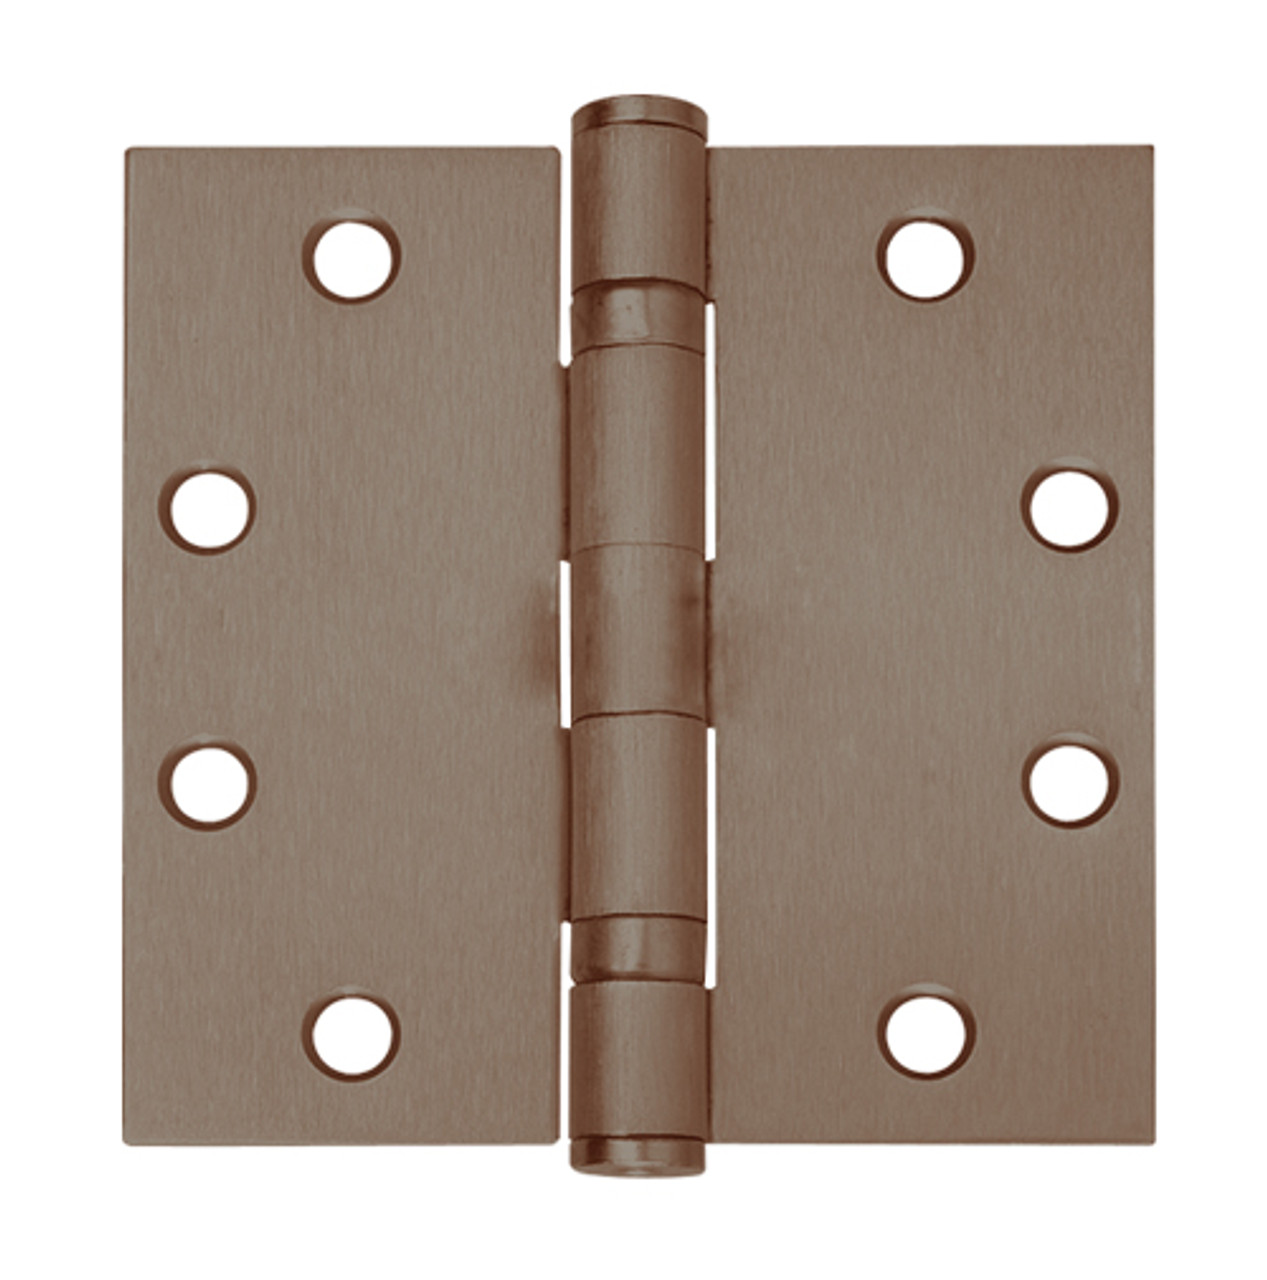 5BB1-4-5x4-643-TW8 IVES 5 Knuckle Ball Bearing Full Mortise Hinge with Electric Thru-Wire in Satin Bronze-Blackened